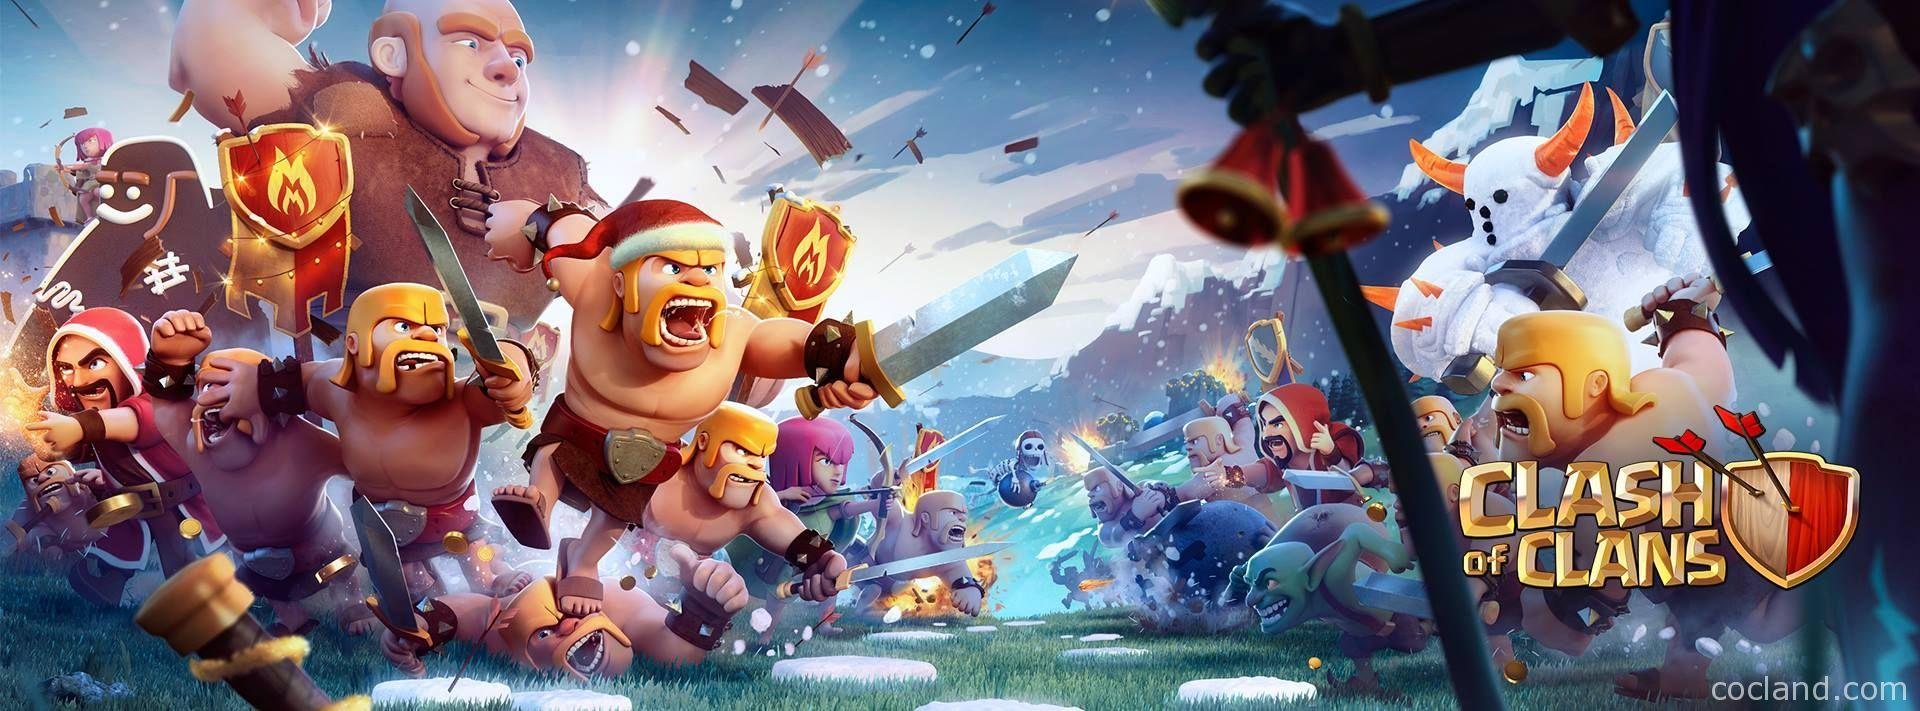 The demand for the Supercell Giant, Clash of Clans